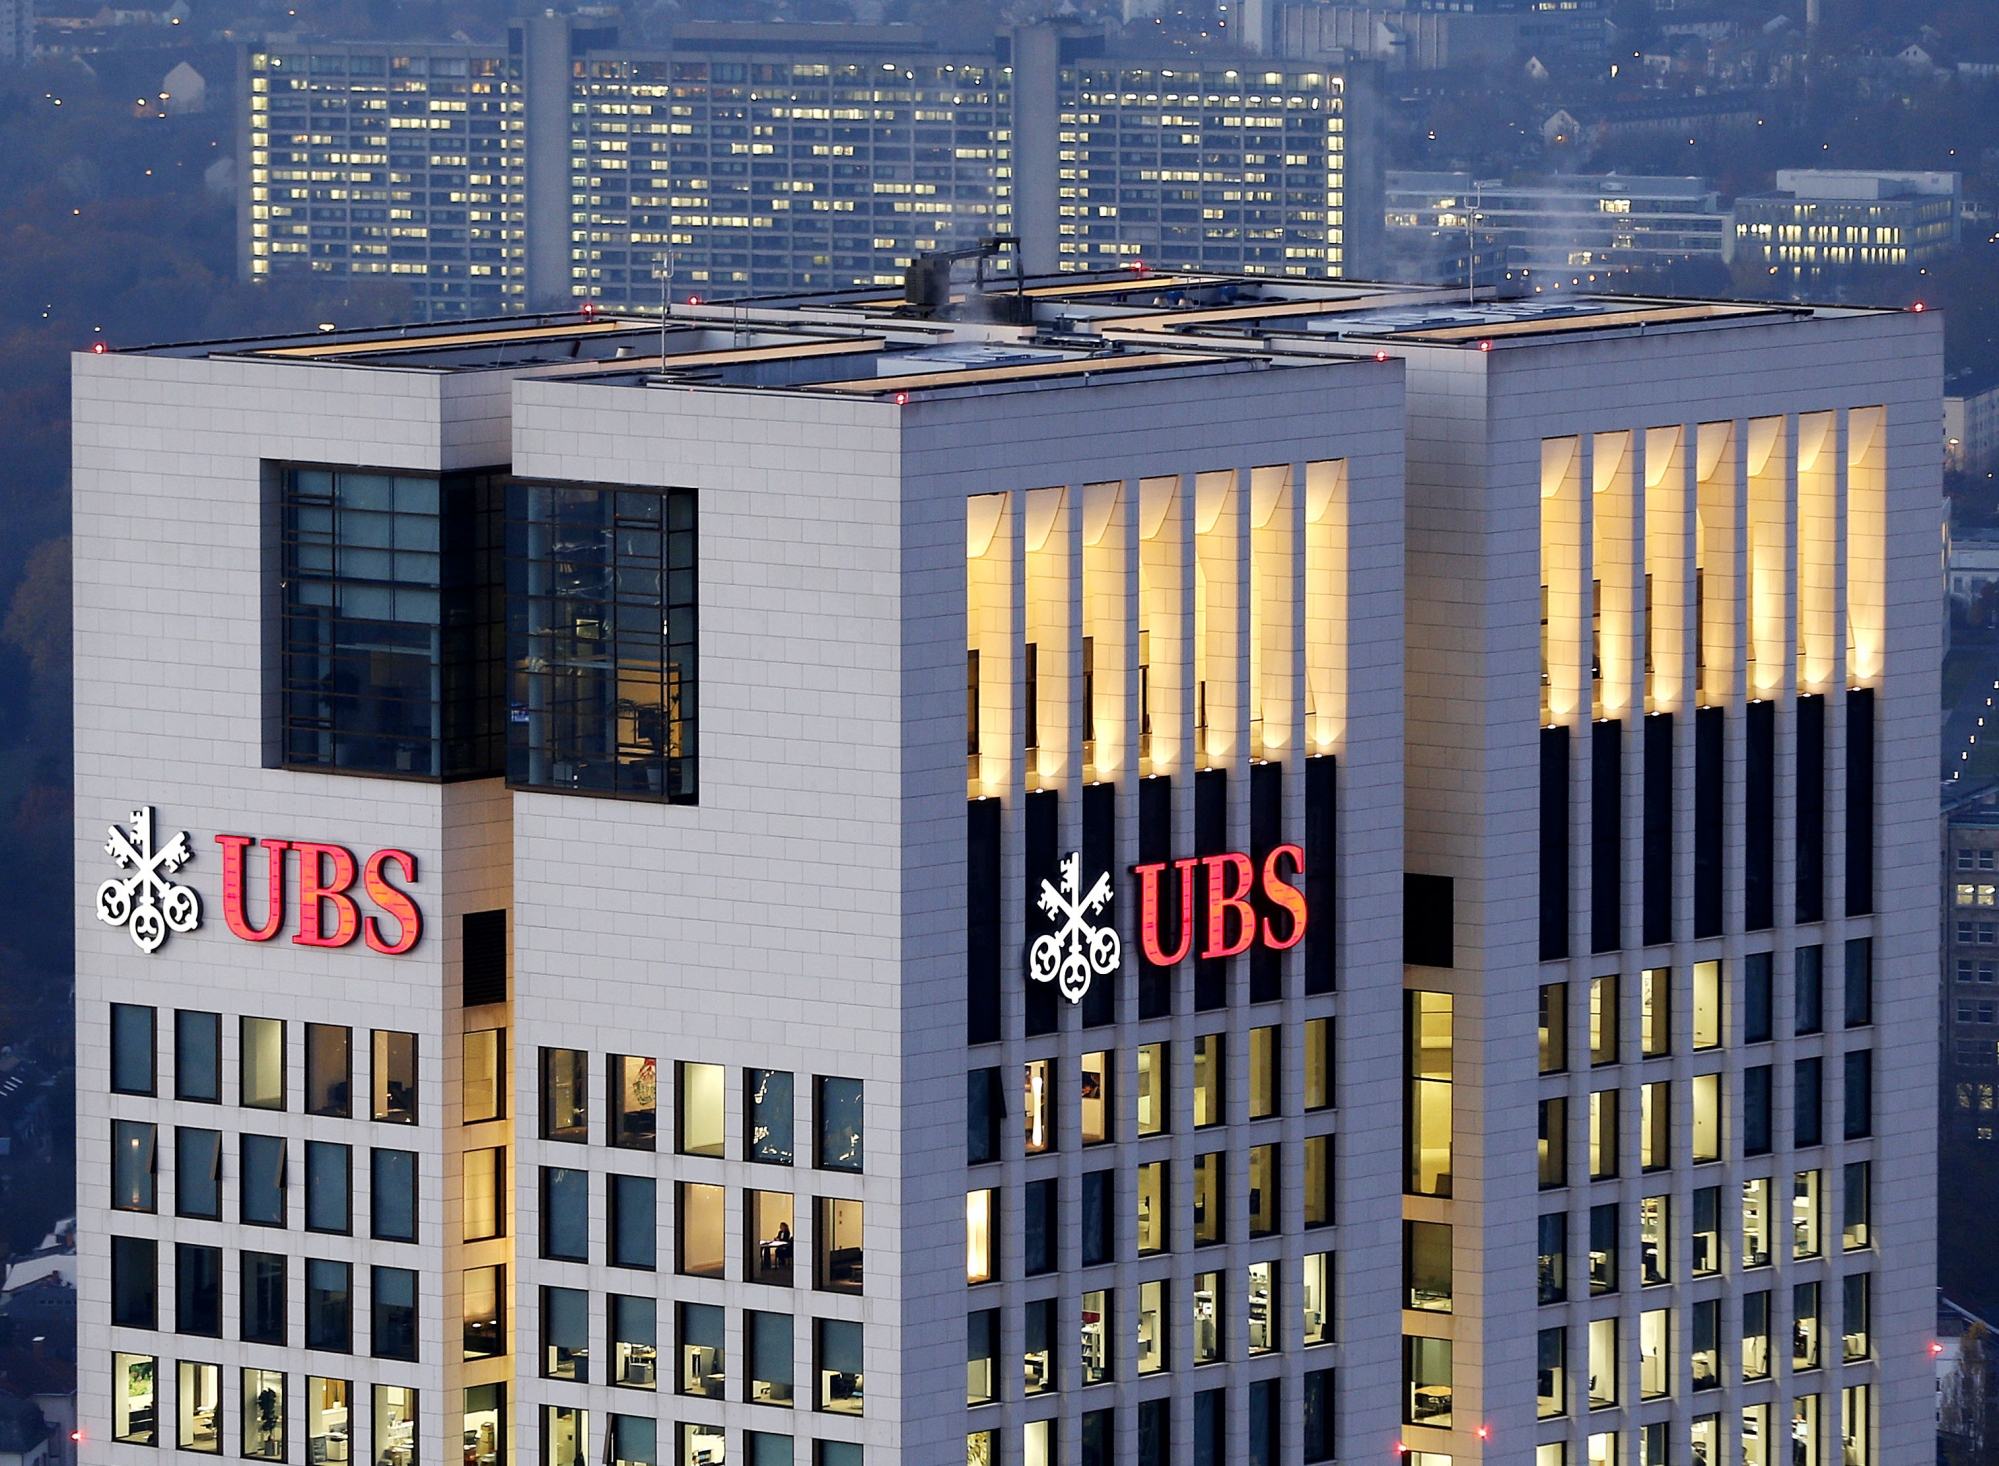 FILE - In this Tuesday, Nov. 13, 2012, file photo, the German headquarter of Swiss UBS bank is photographed in Frankfurt, Germany. UBS AG reports quarterly results before the market open on Tuesday, Oct. 29, 2013. (AP Photo/Michael Probst, File)